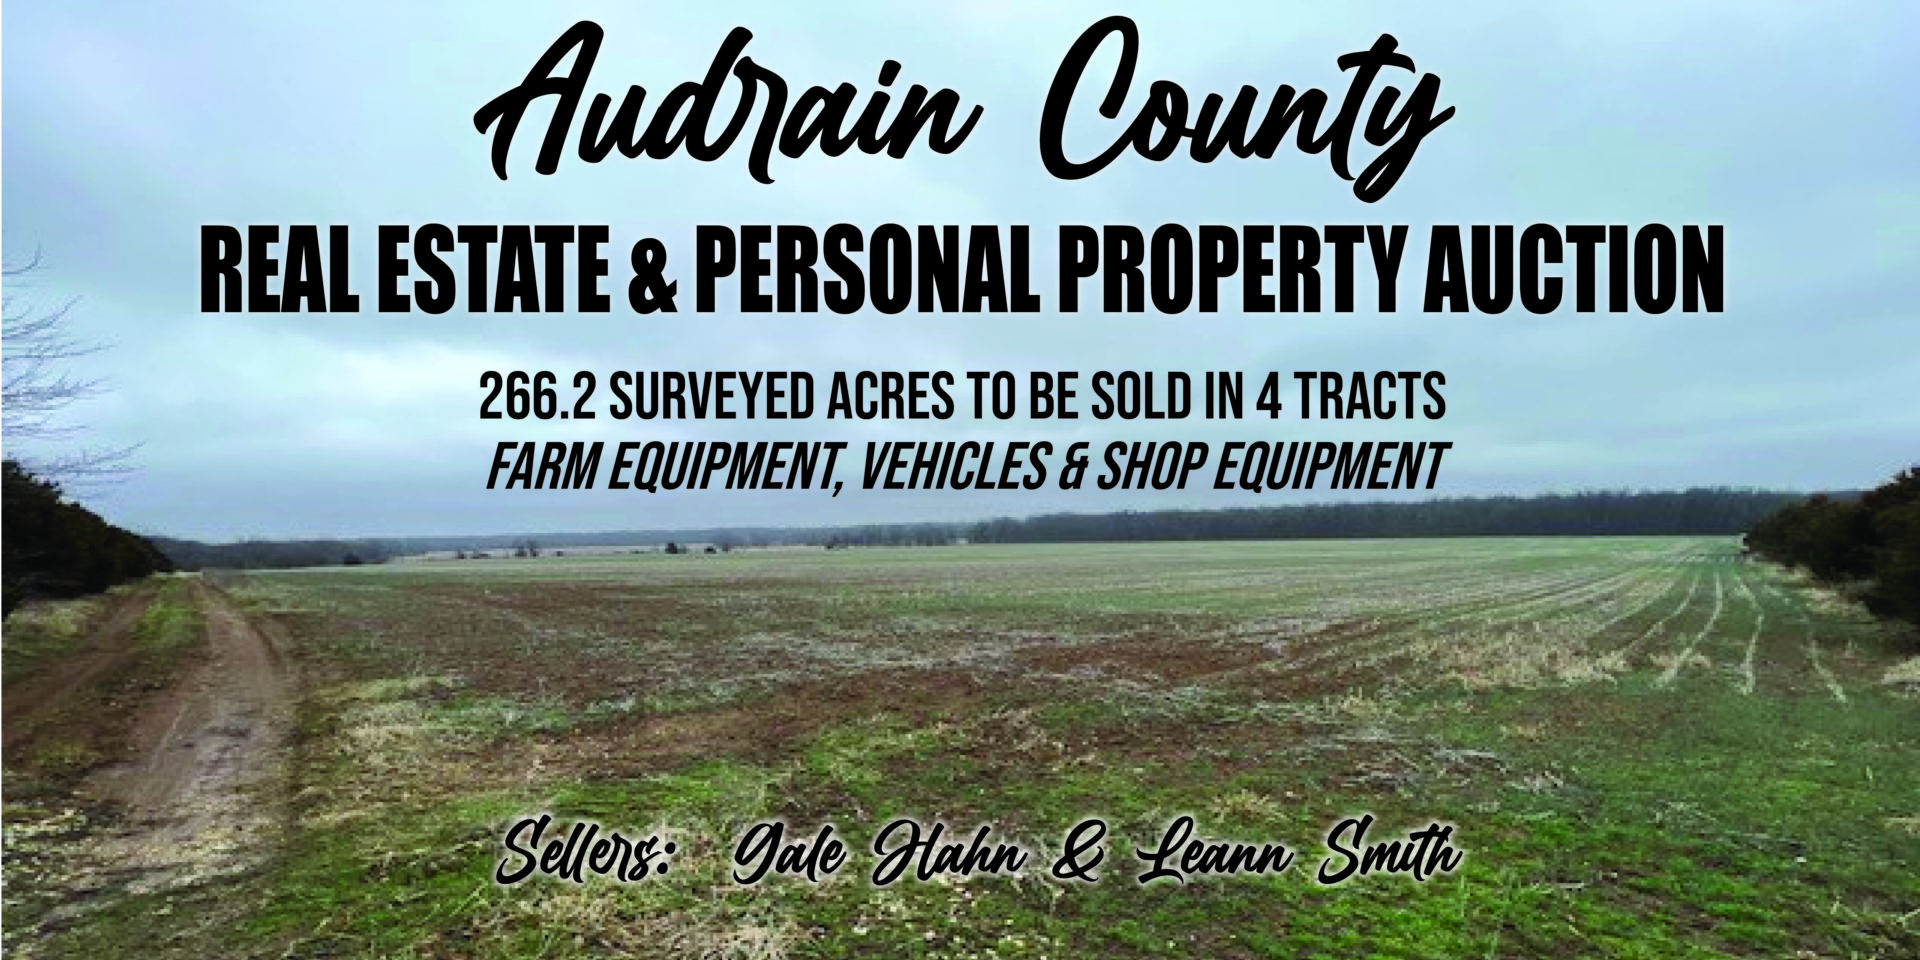 Audrain County Real Estate & Personal Property Auction